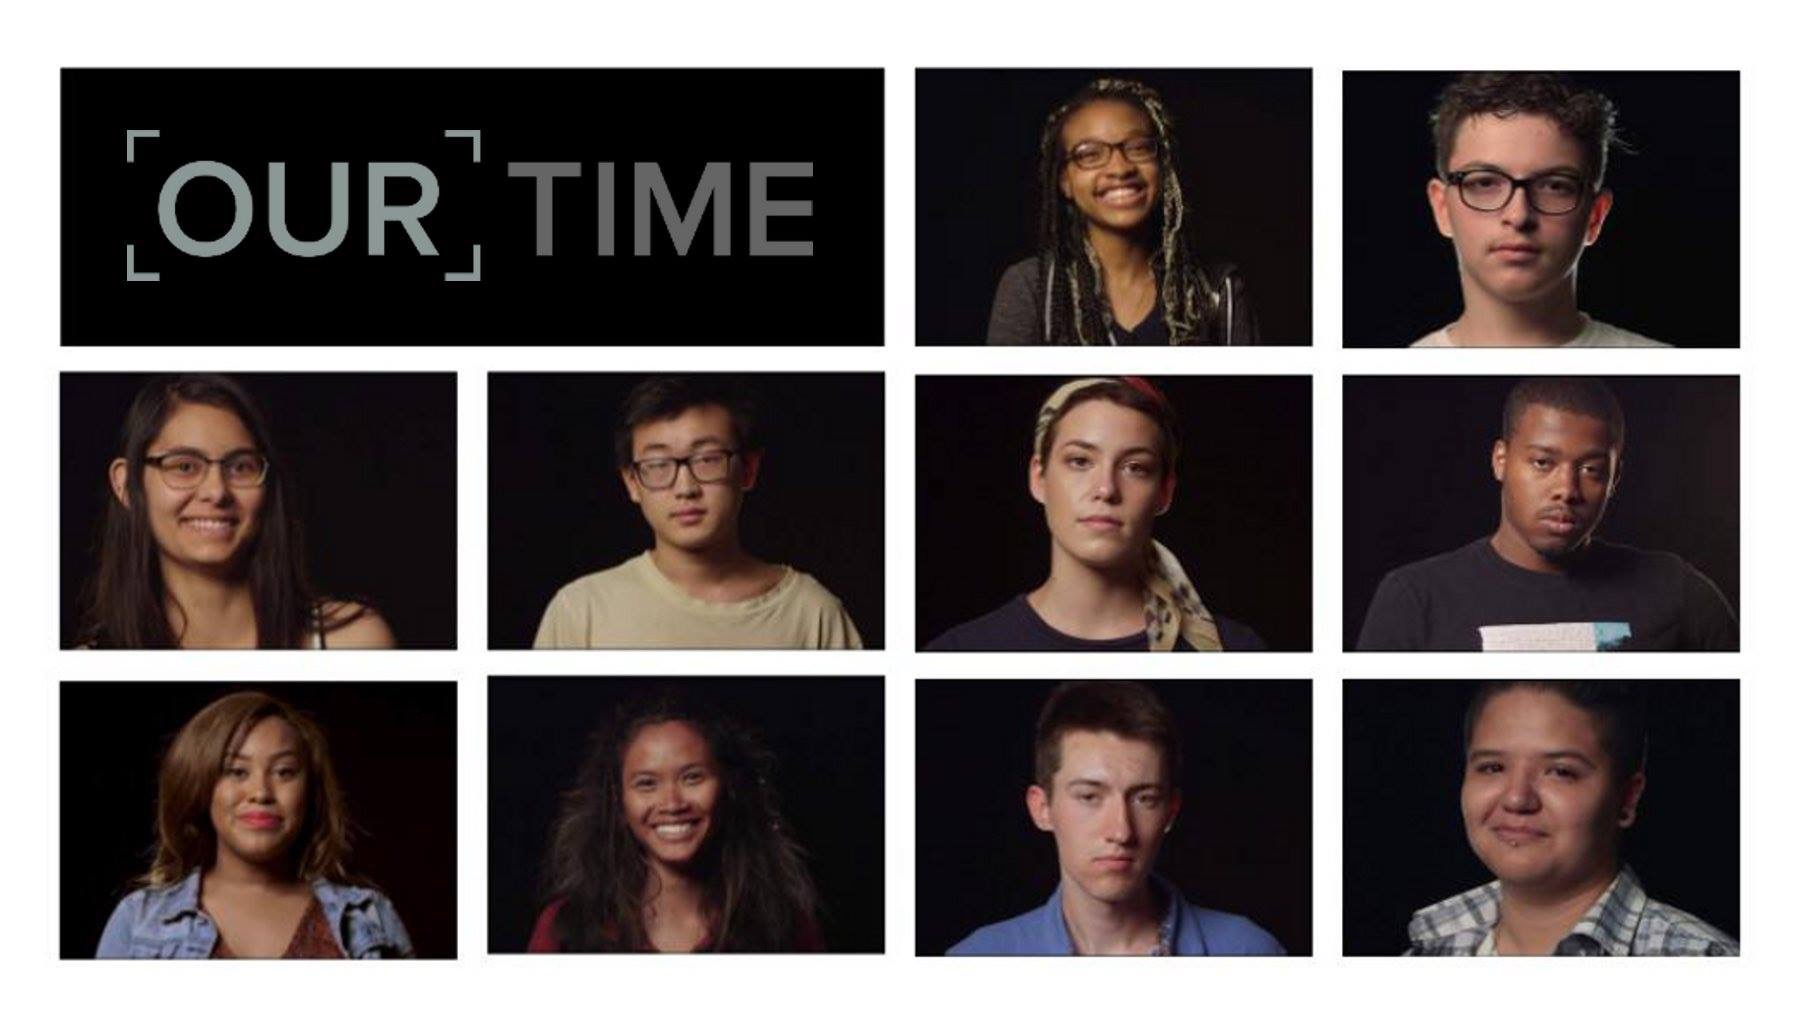 OUR TIME airs nationally on PBS